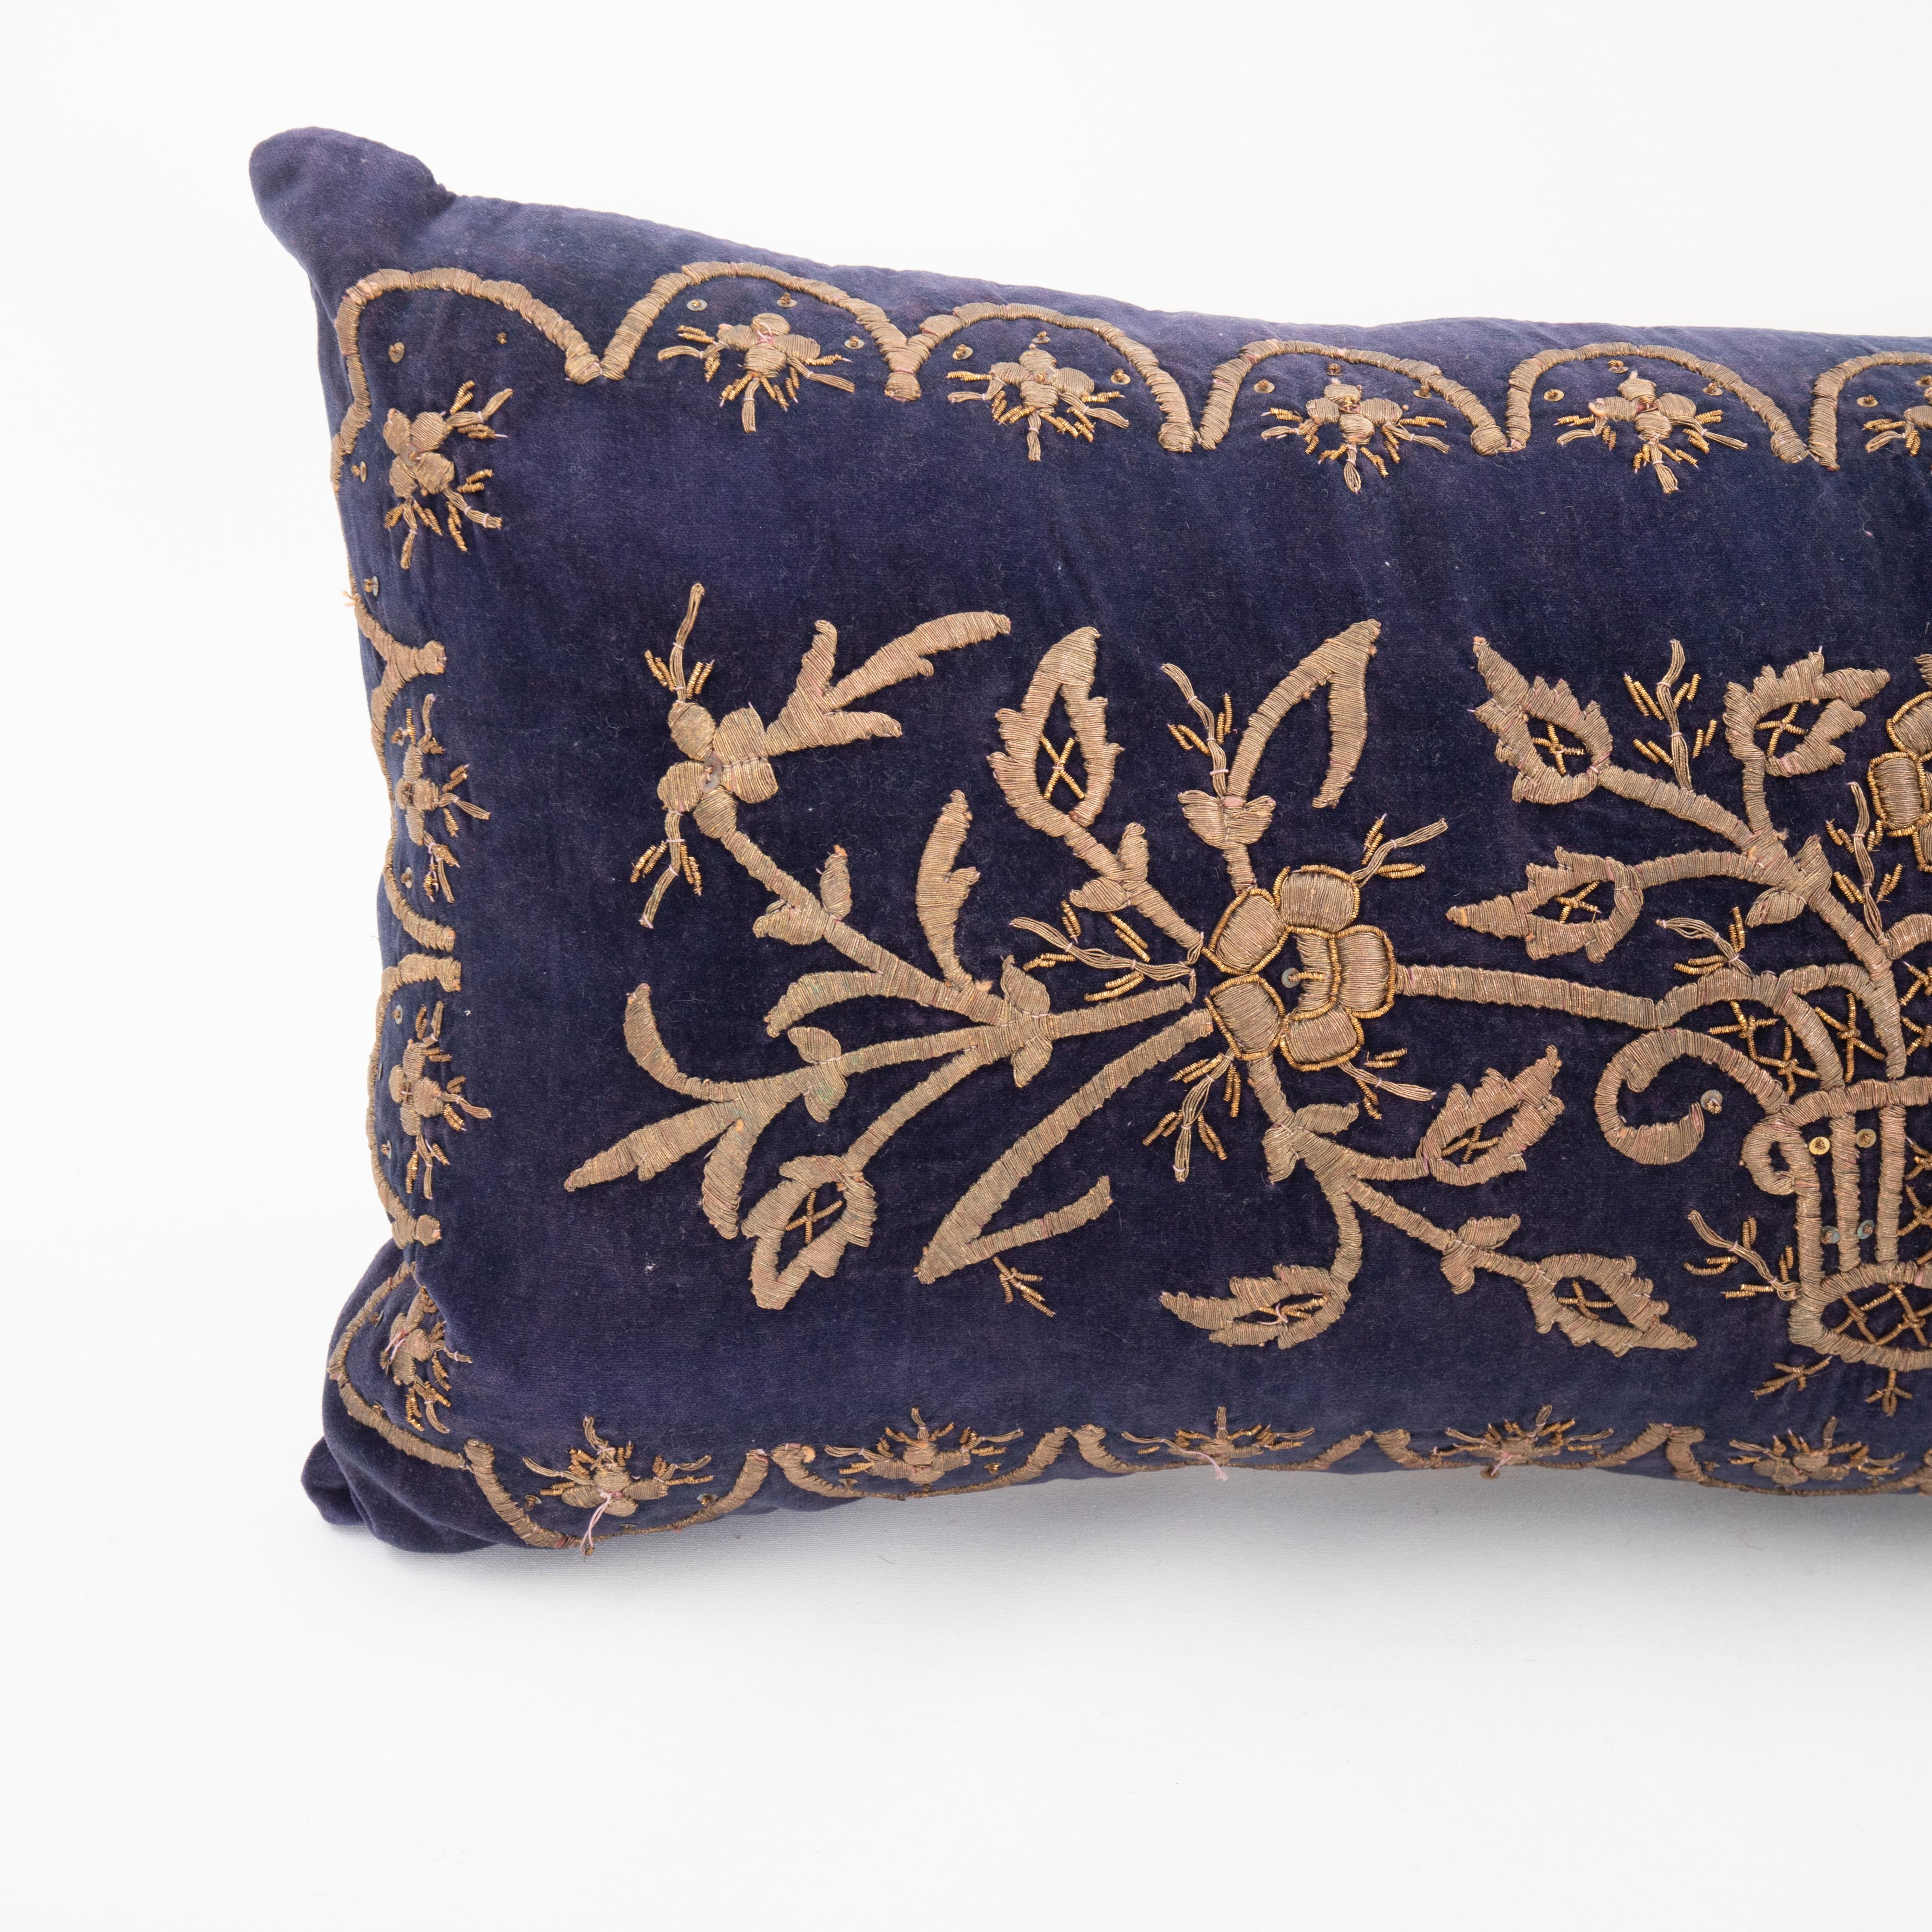 Turkish Ottoman Pillow Cover in Sarma Technique, late 19th / Early 20th C. For Sale